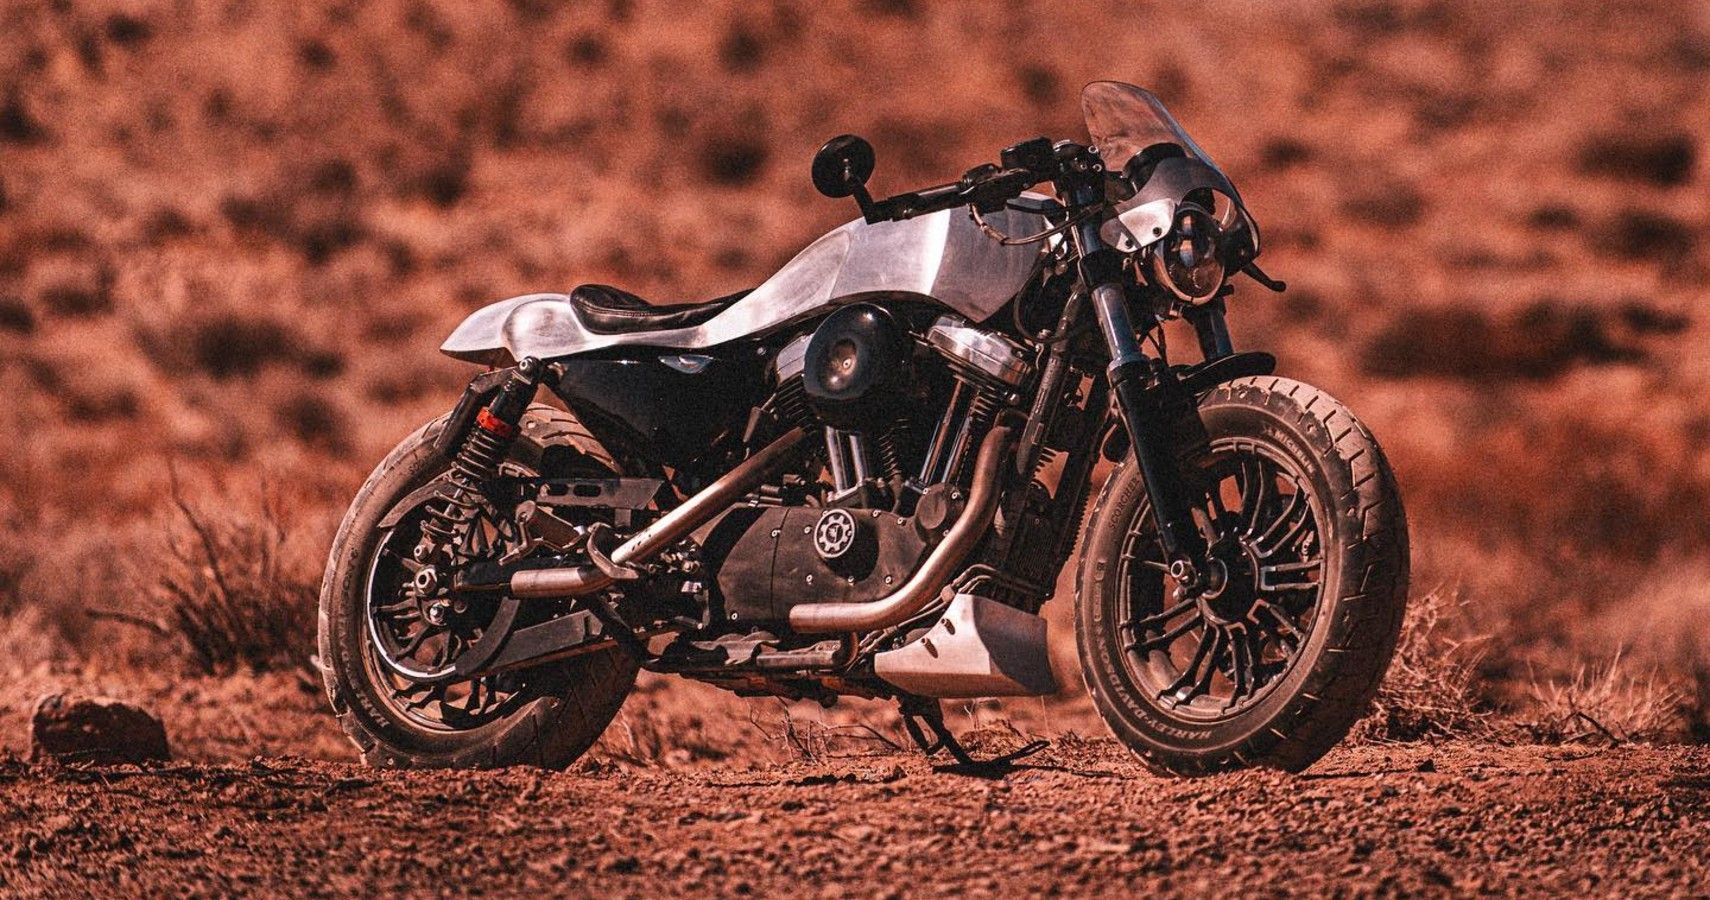 CROIG's custom Harley-Davidson Forty-Eight built for Waves for Water.